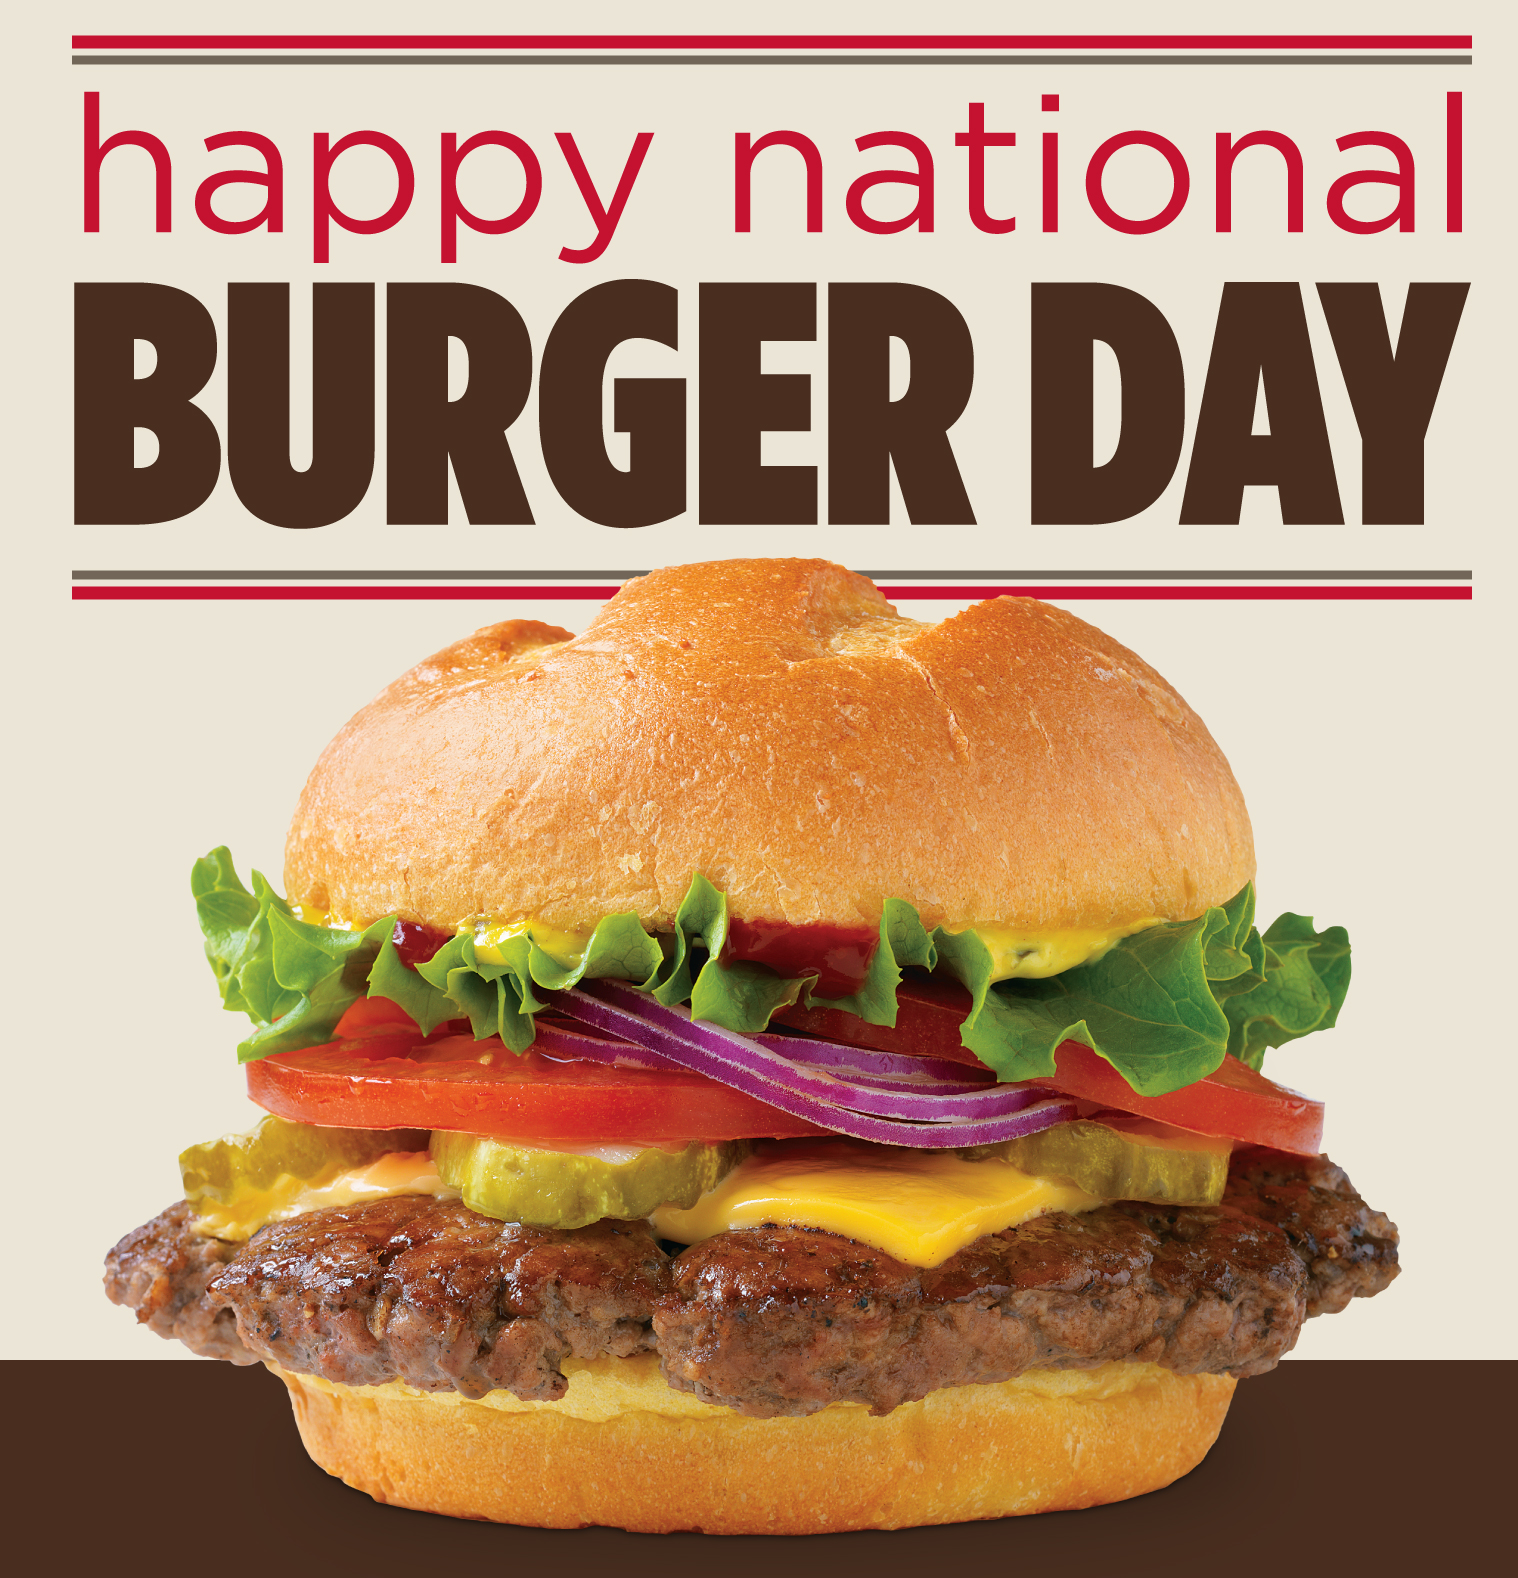 National Burger Day August 25th 2016 Saiprojects